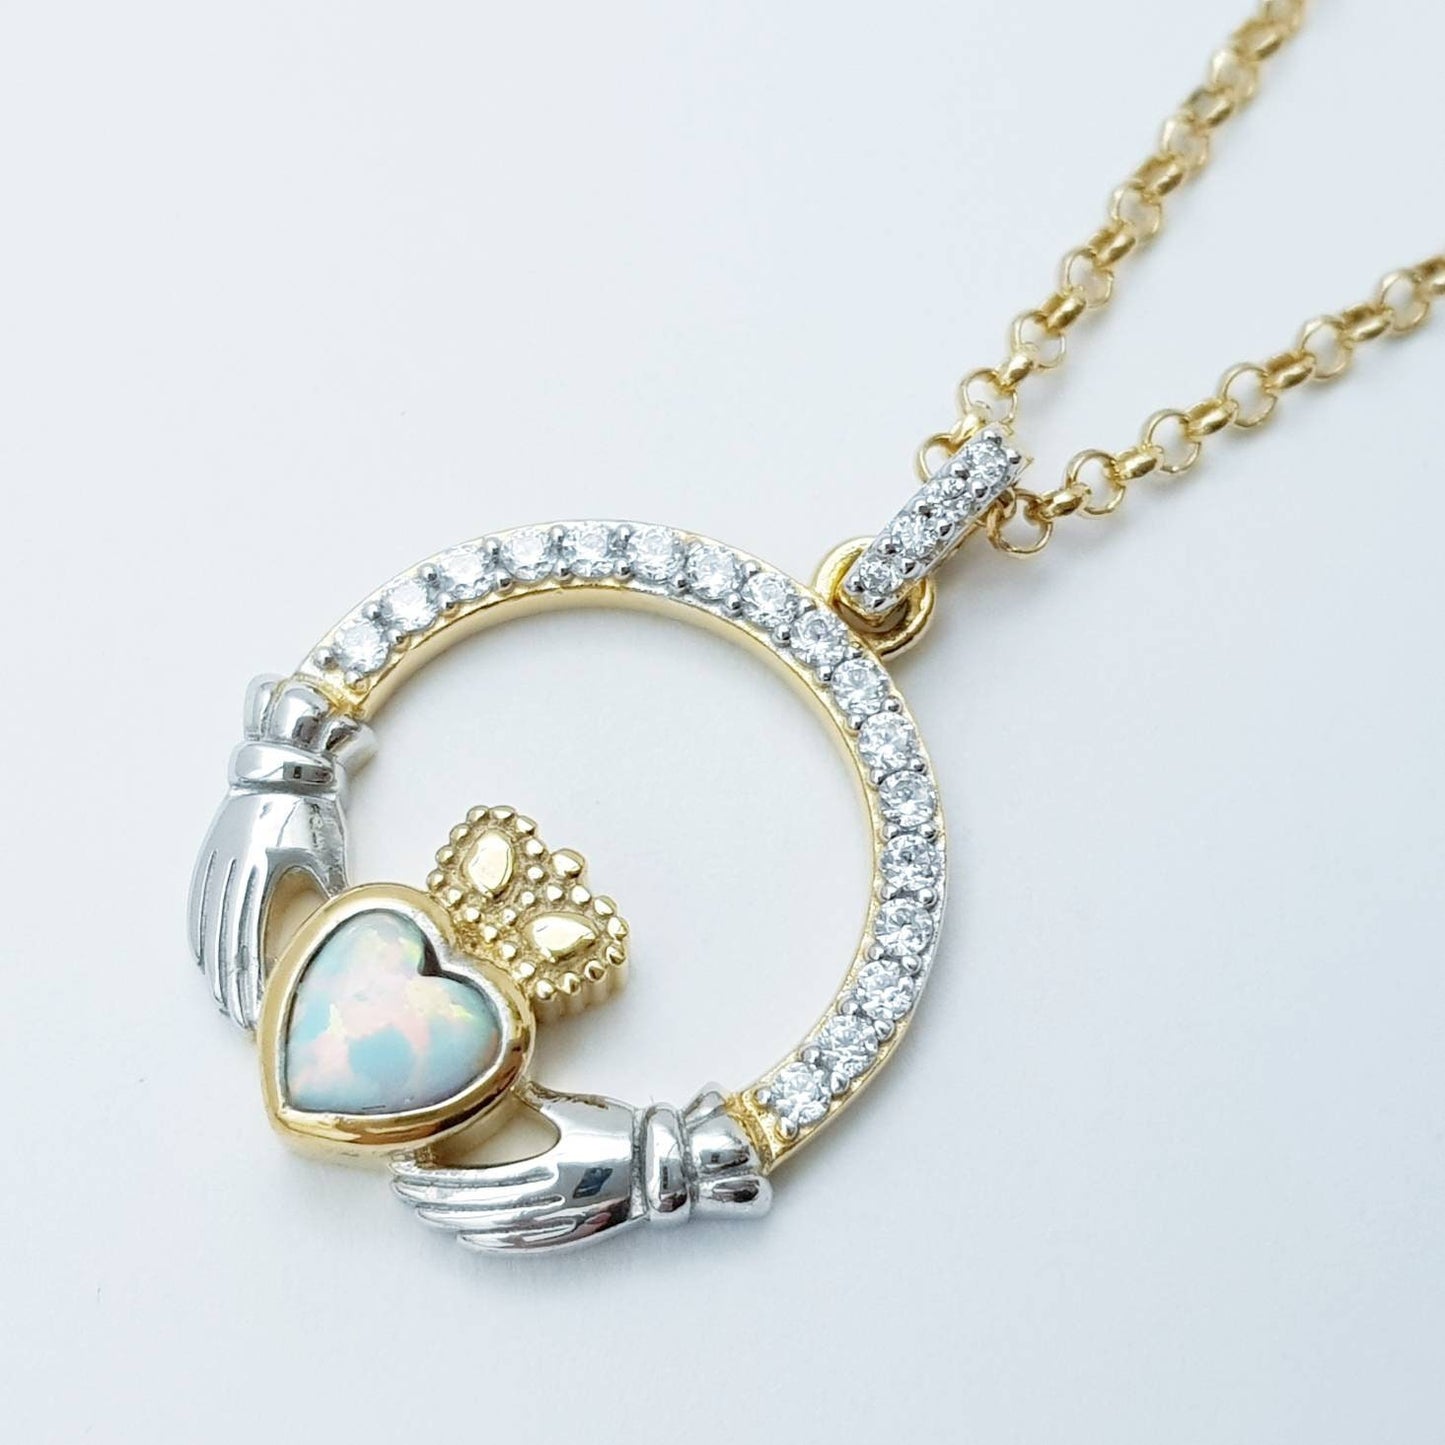 White Opal Claddagh pendant, claddagh necklace, yellow gold claddagh pendant October birthstone